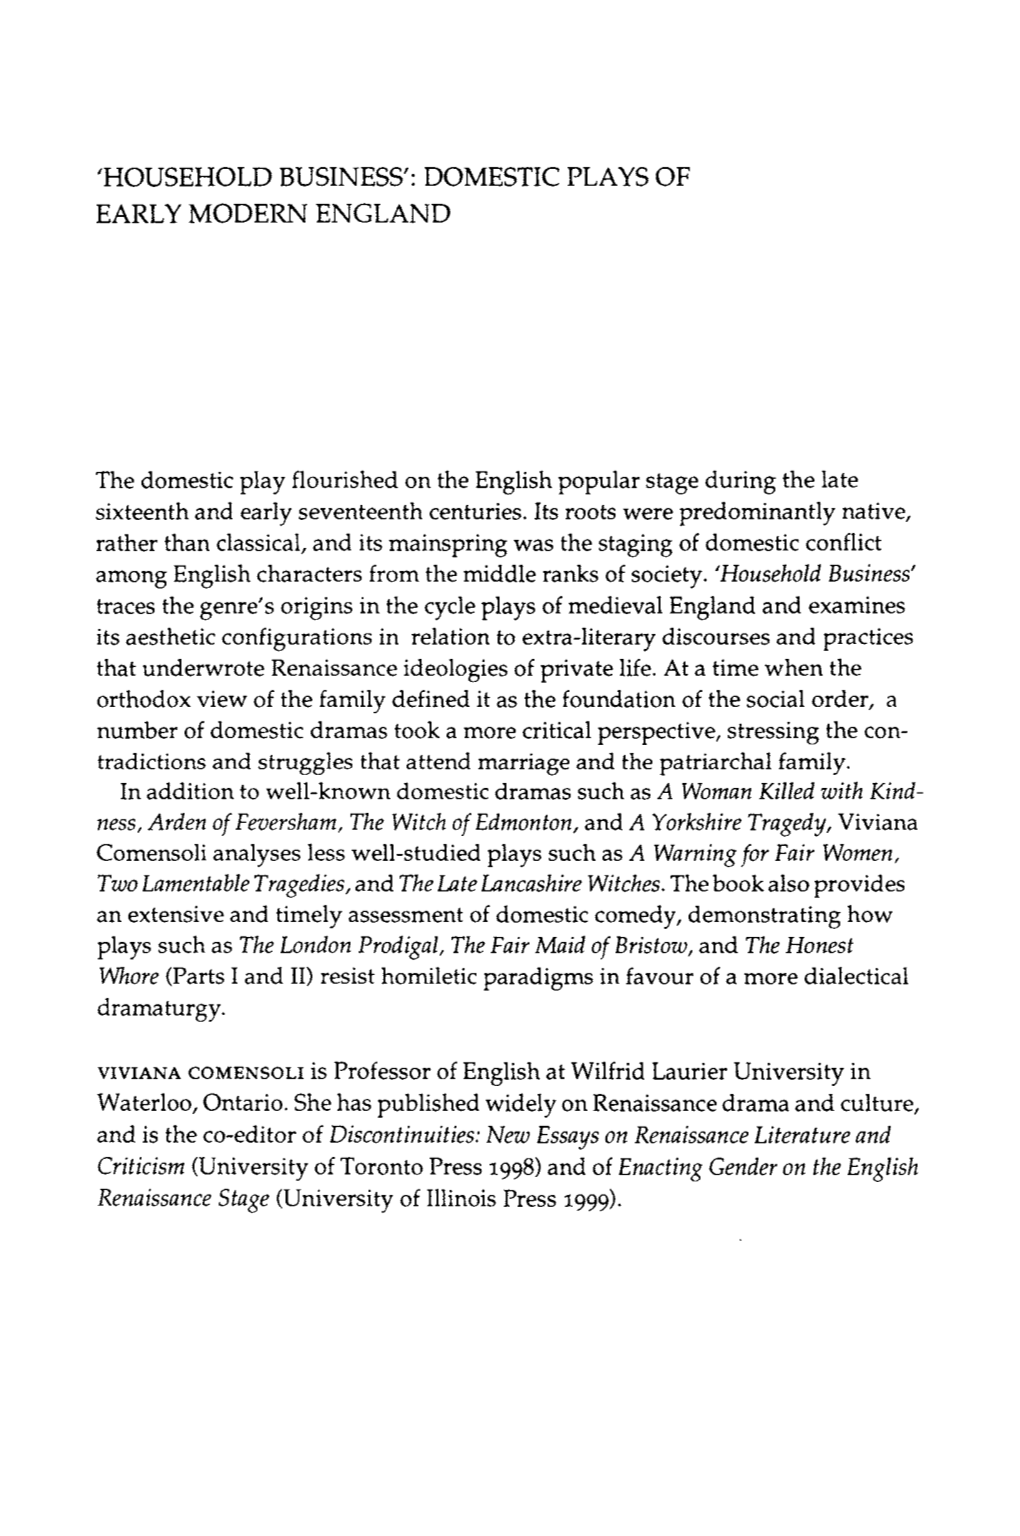 Domestic Plays of Early Modern England